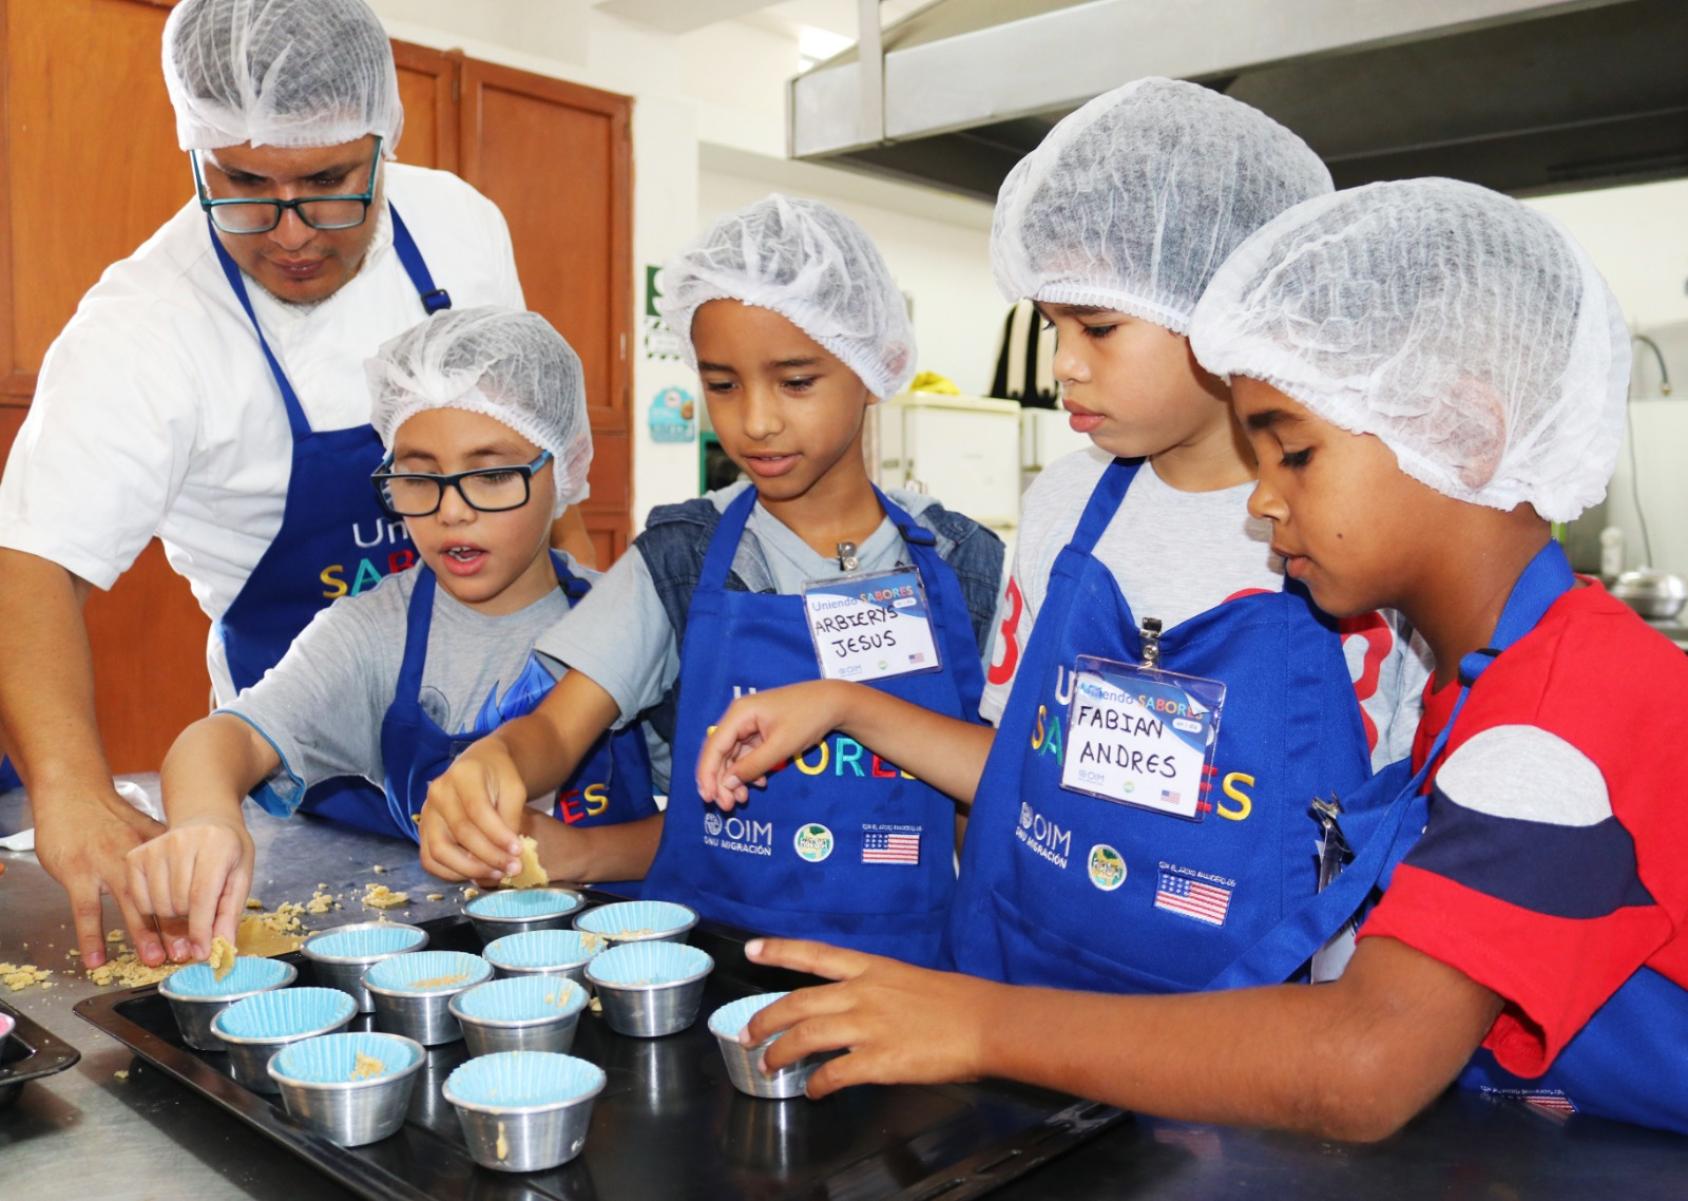 Four children in chefs caps bake together